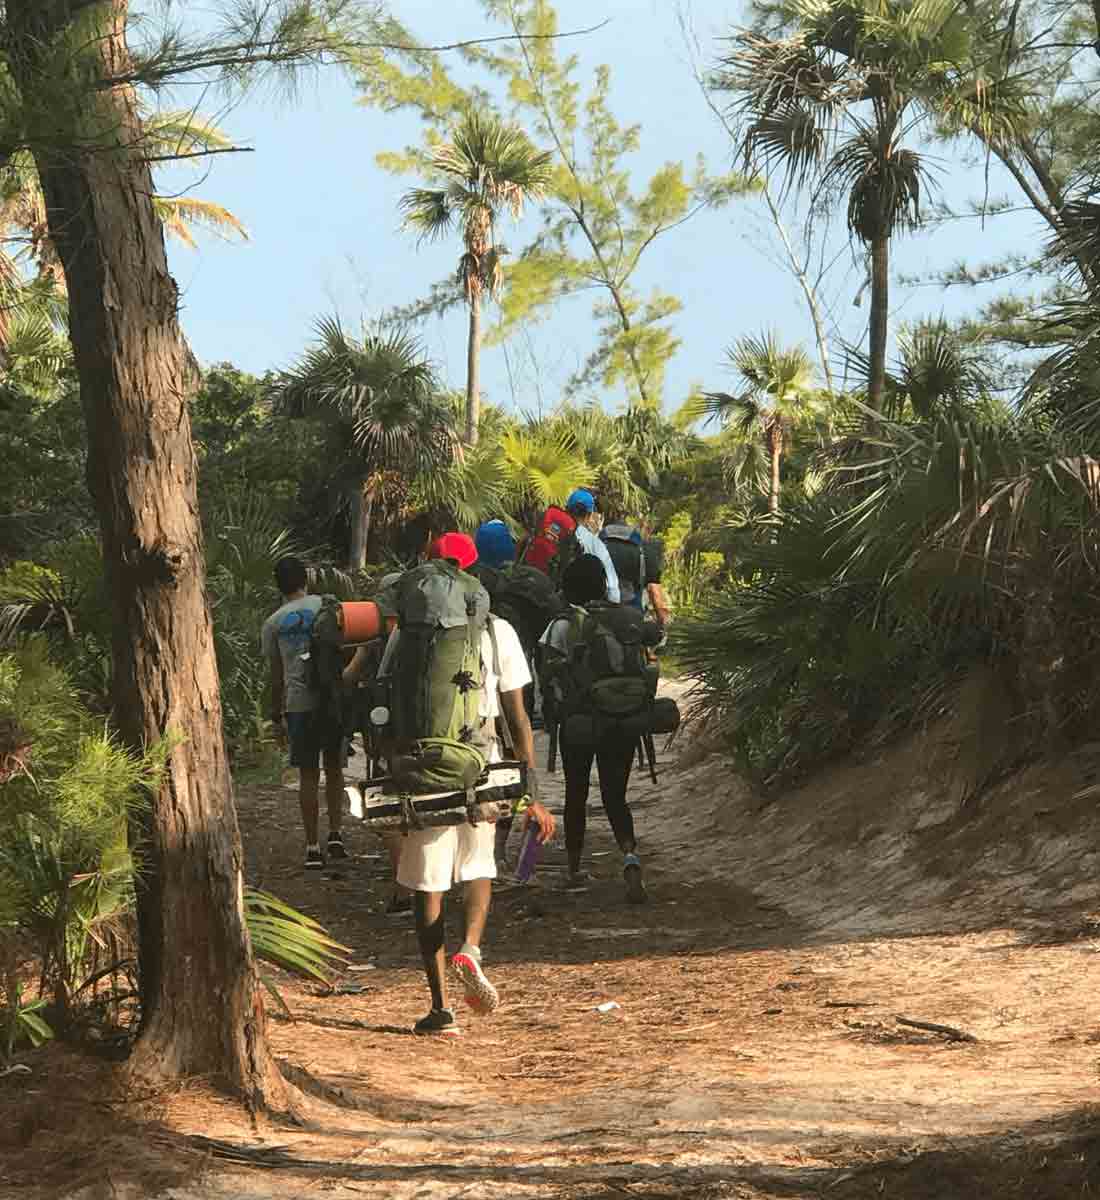 Students wearing backpack hiking on trail in tropical woods